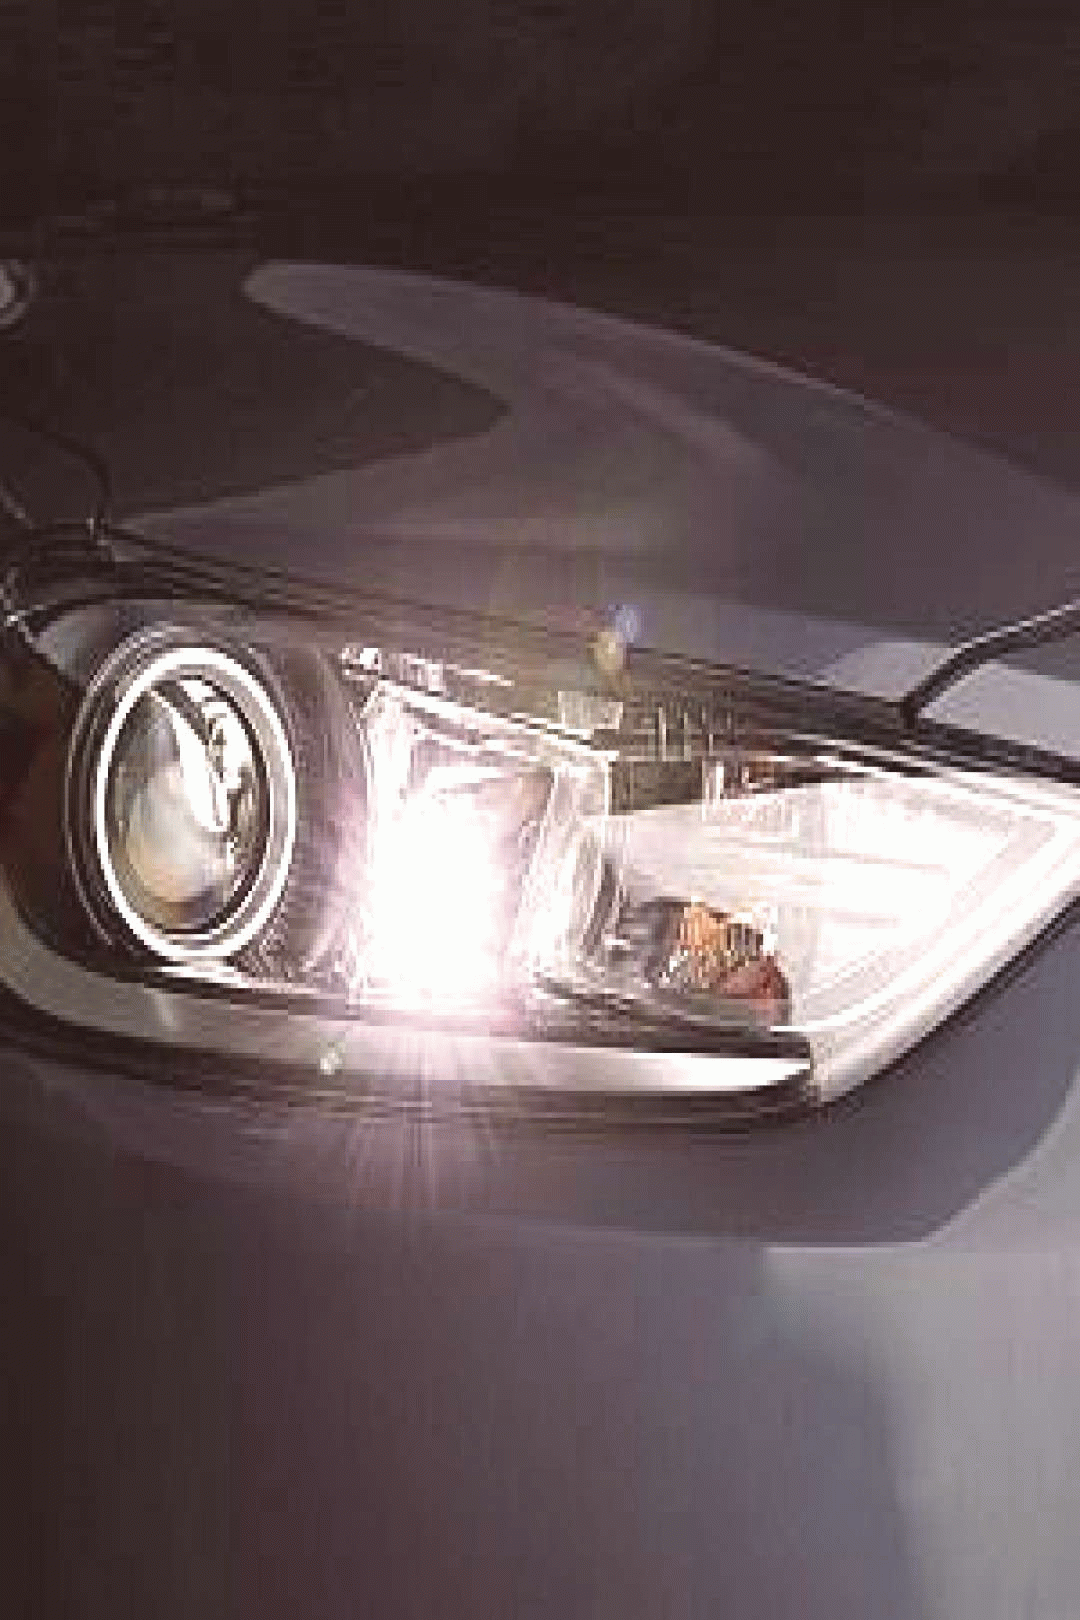 pack led veilleuse pour land rover range l322 sportvoguehse 20022012 in 2020 mercedes clk engine of lambo aventador small